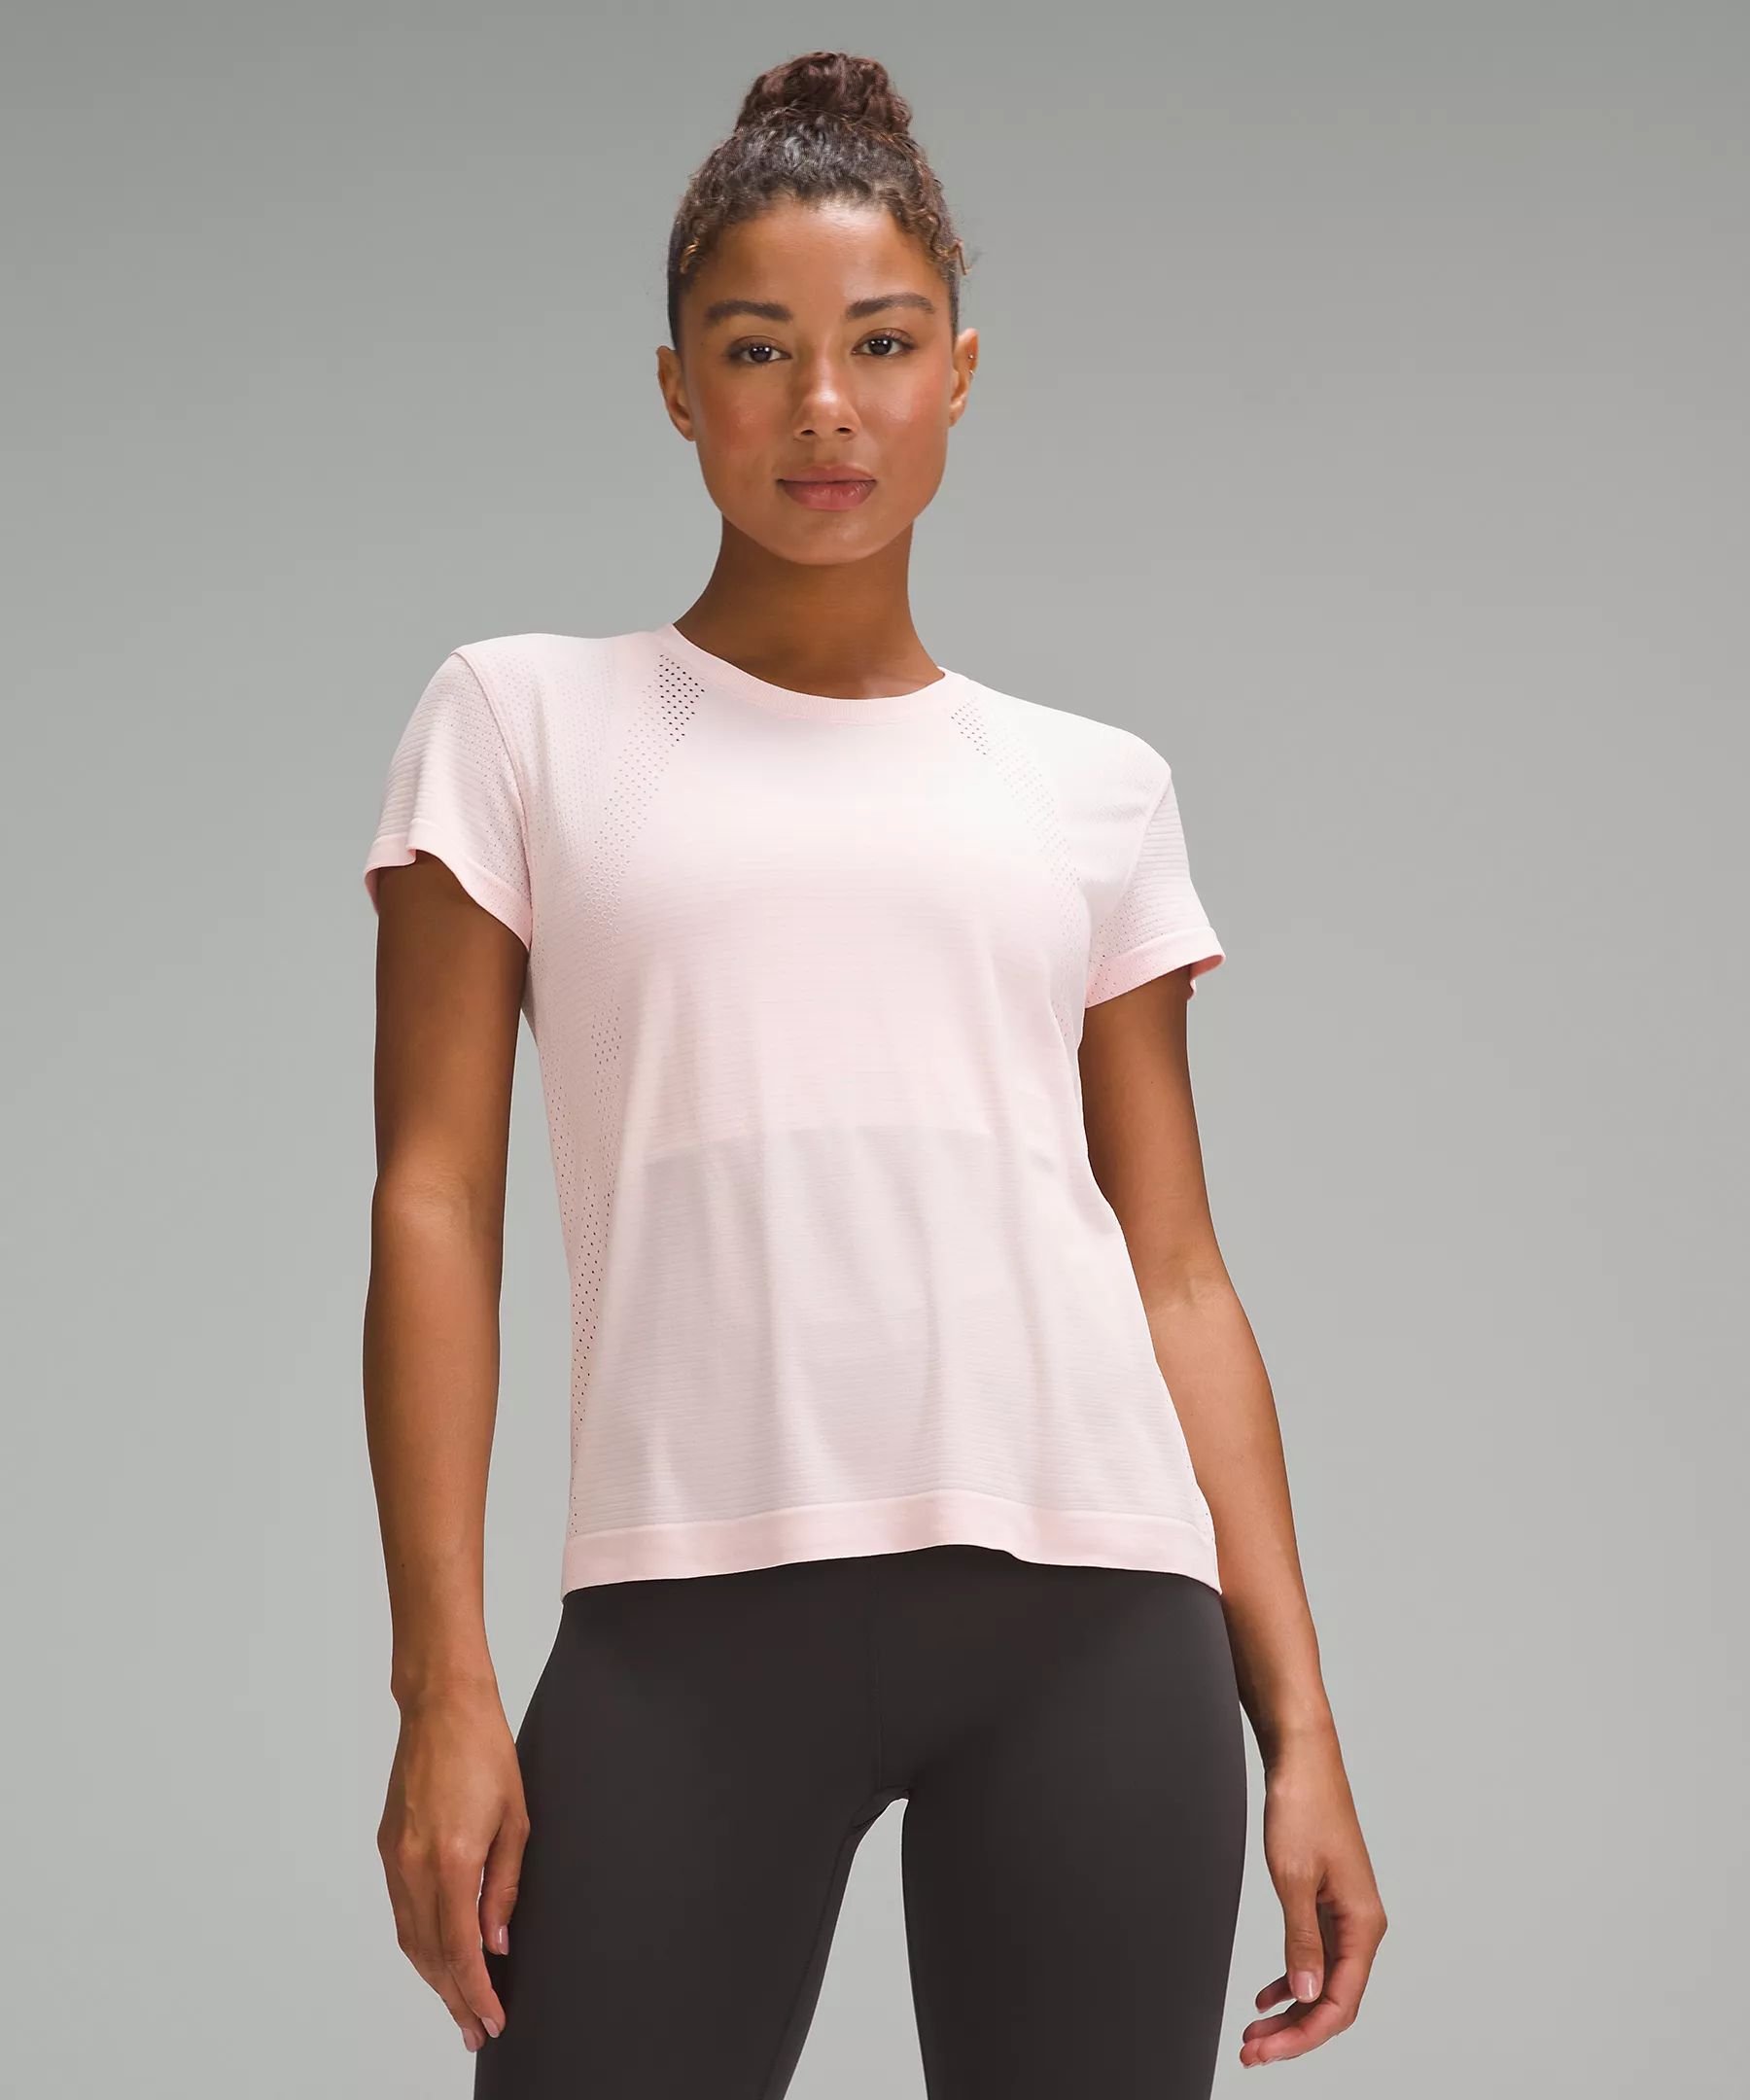 Train to Be Short-Sleeve Shirt$68 USDAdd to Wish ListKiele is 5’9” and wears a size 6ColourS... | Lululemon (US)